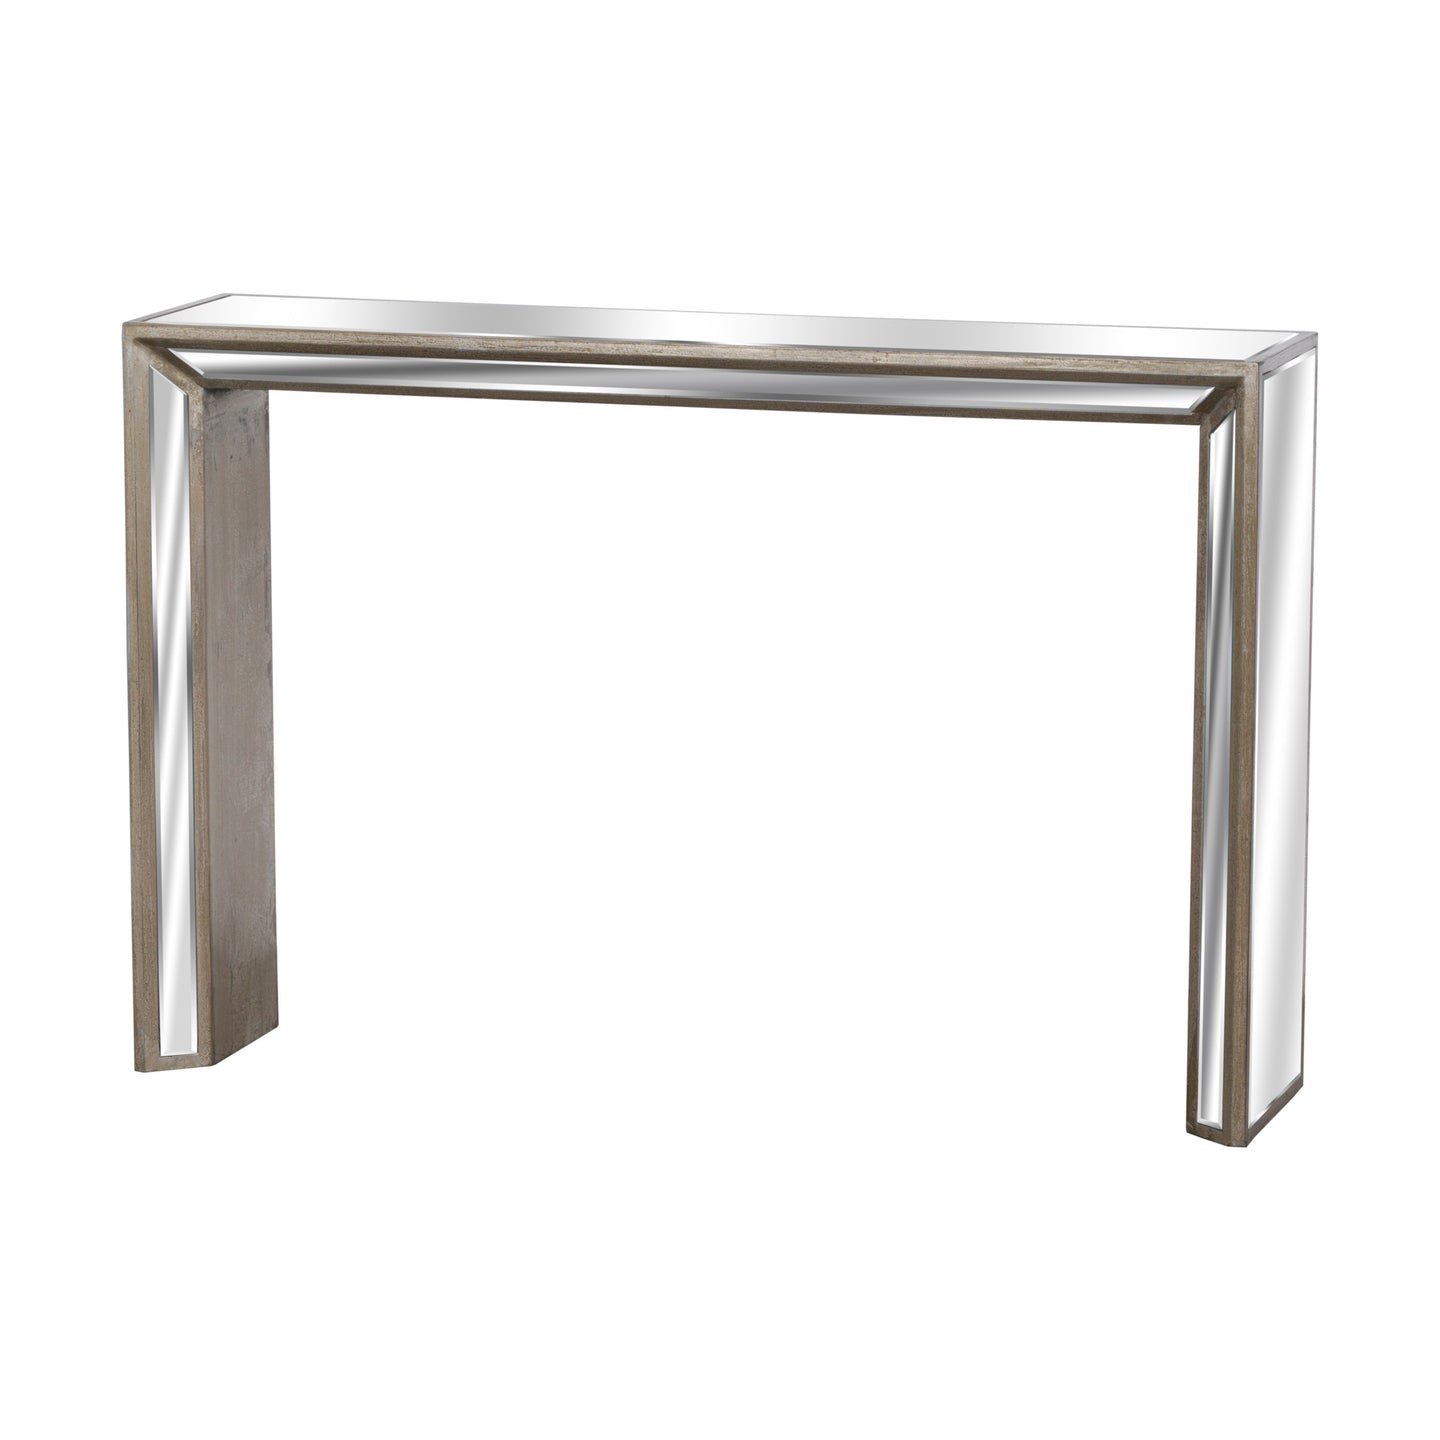 Silver Mirrored Glass Top with Metallic Paint Console Table